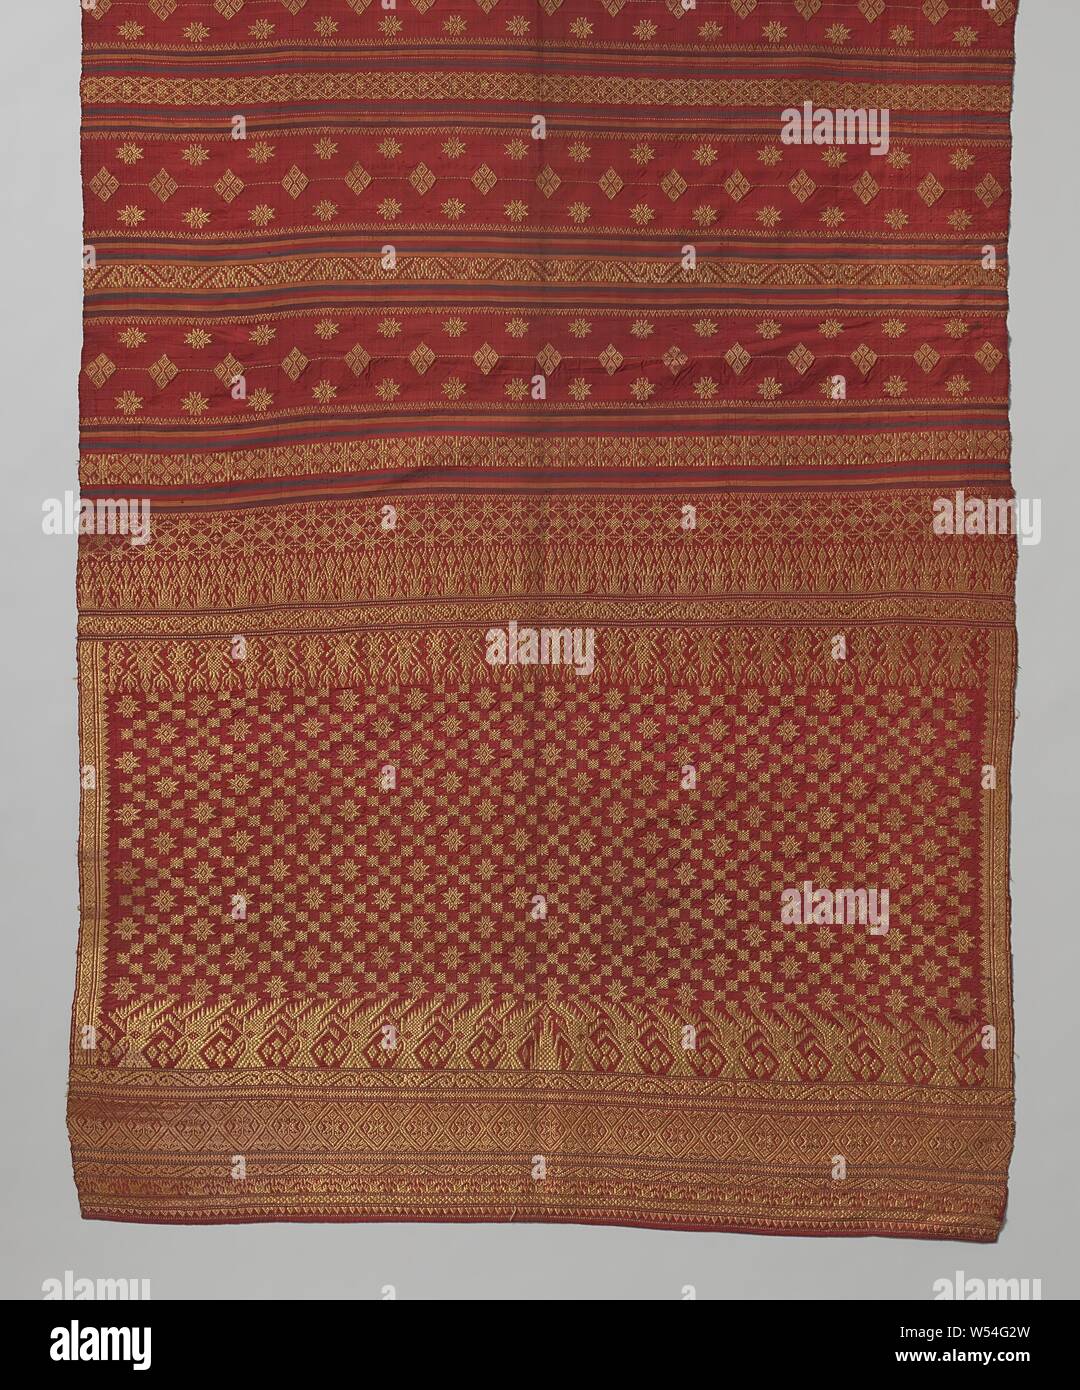 Cain of oriental silk fabric, Cain of red silk with a gold-woven decor. The midfield decorated with the so-called Bintang pattern. On the narrow sides a wide richly decorated border., anonymous, Sumatra, c. 1400 - c. 1850, silk, metal thread, l 260 cm × w 71 cm Stock Photo